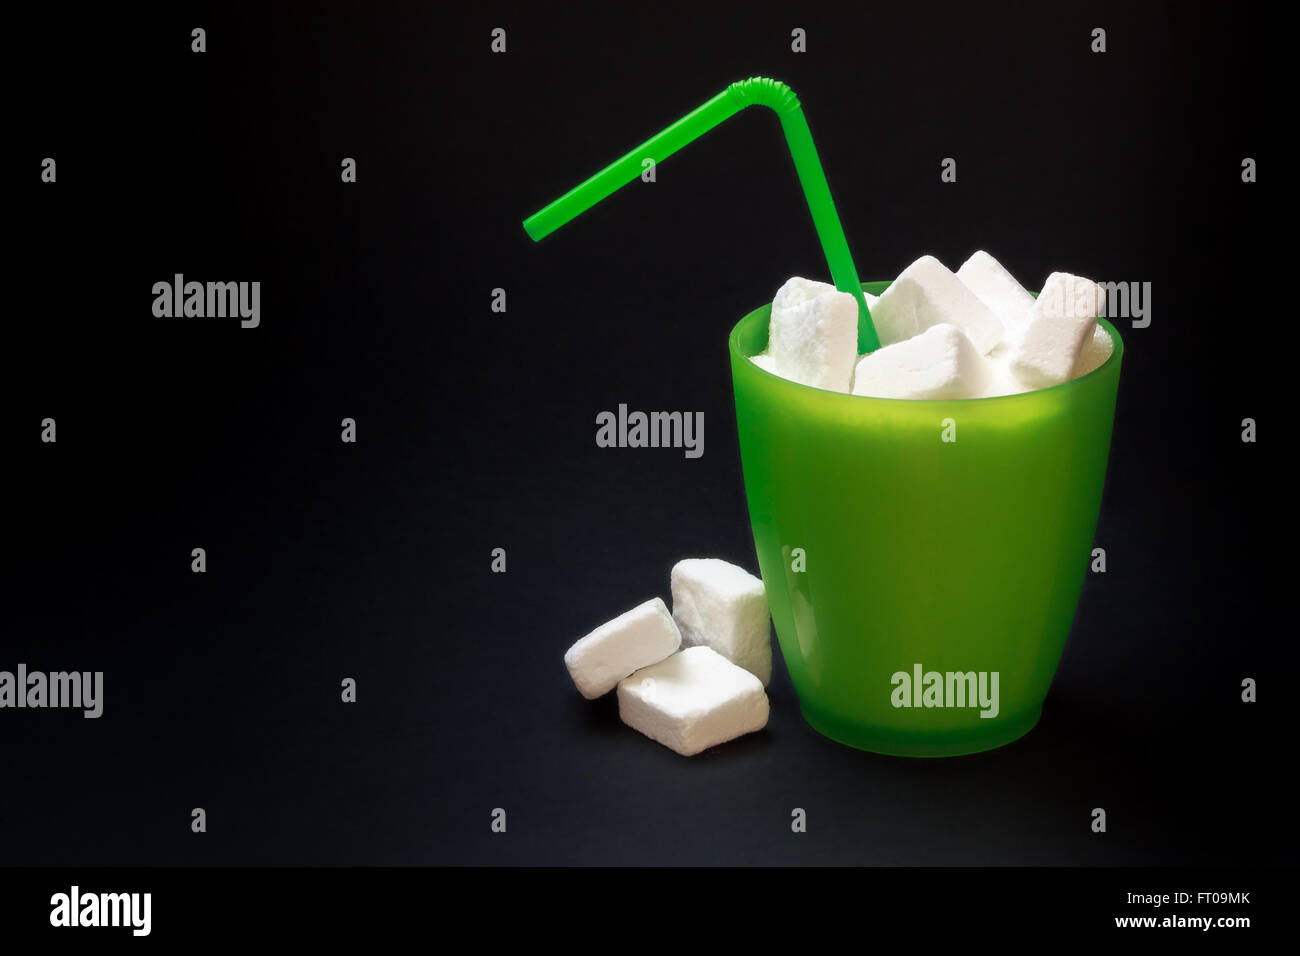 Green plastic glass with straw full of sugar and sugar cubes on black background. Concept image for too much sugar in sodas Stock Photo